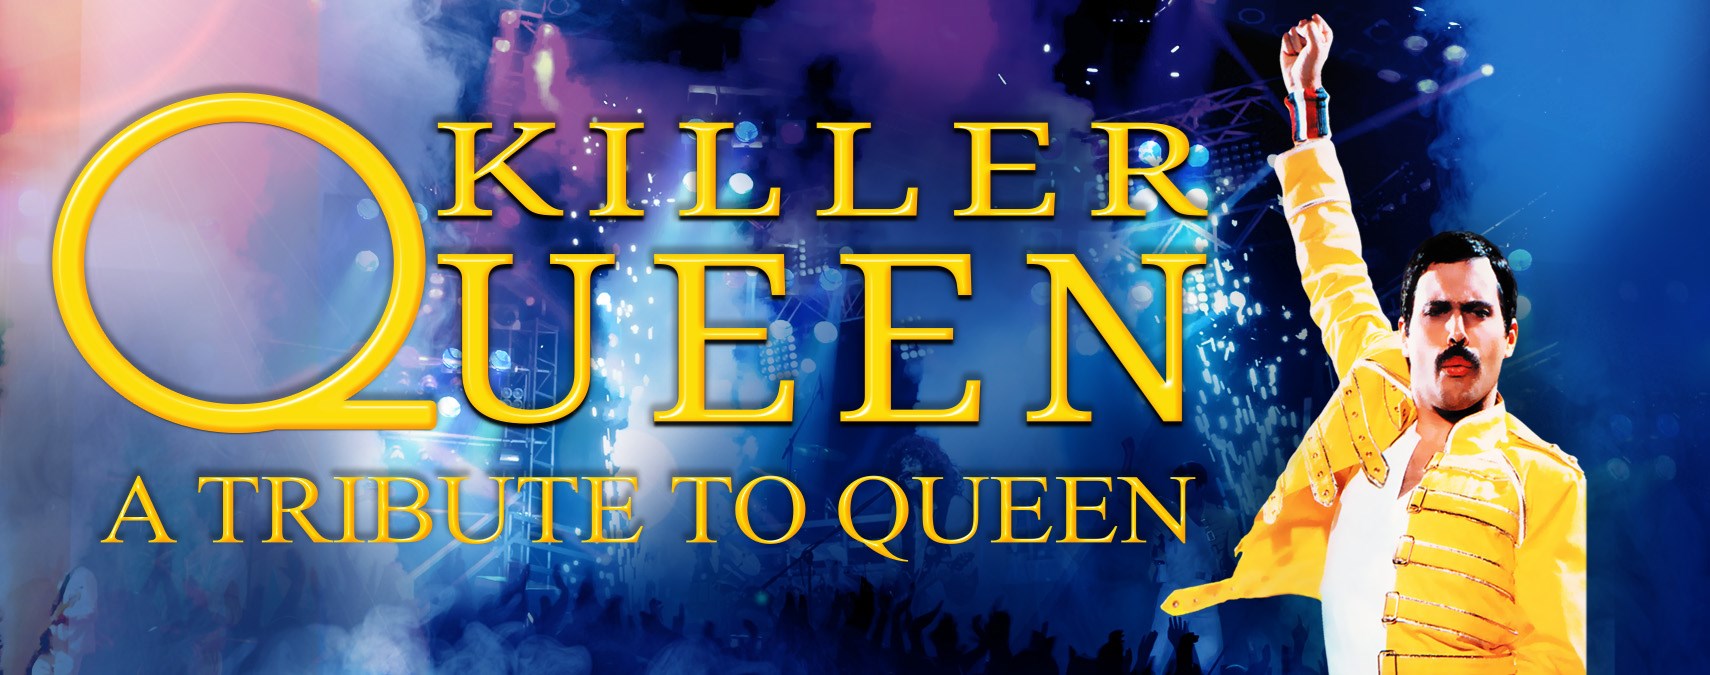 Killer Queen: A Tribute to Queen - October 18, 2022 at 7:30 pm